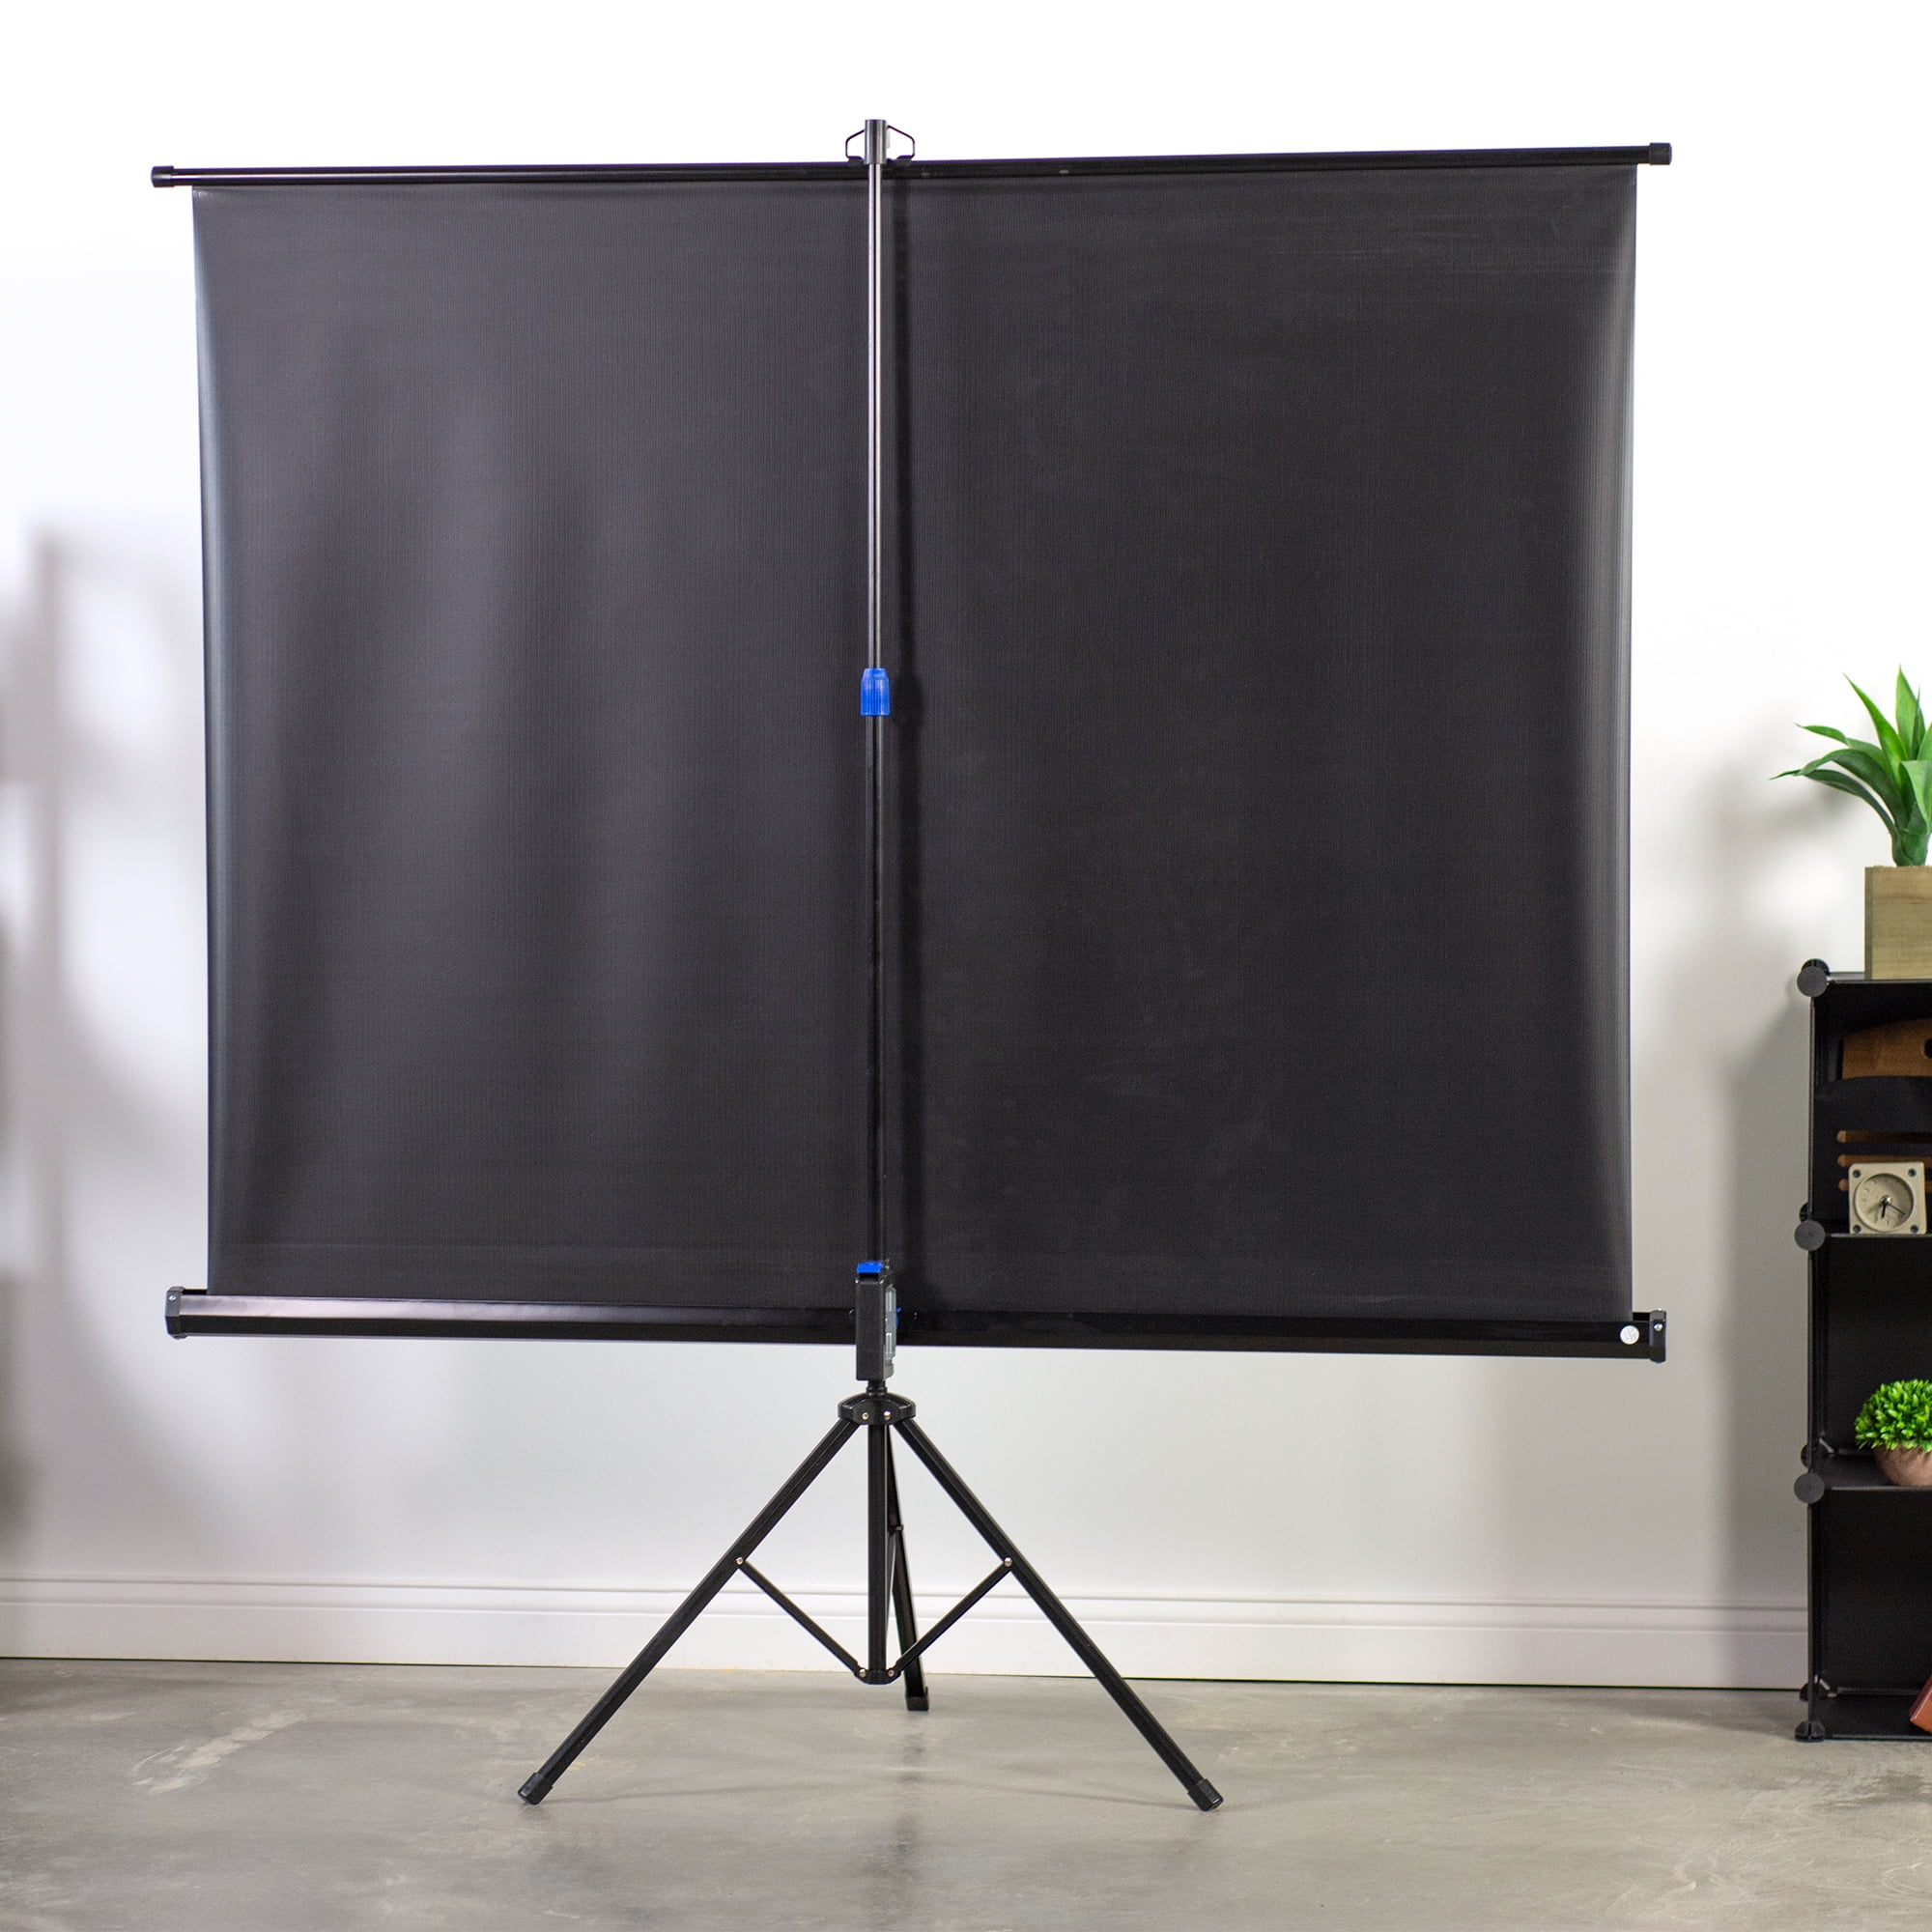 Tripod 100 Inch 4:3 HD Projector Adjustable Projection Screen Portable Stand